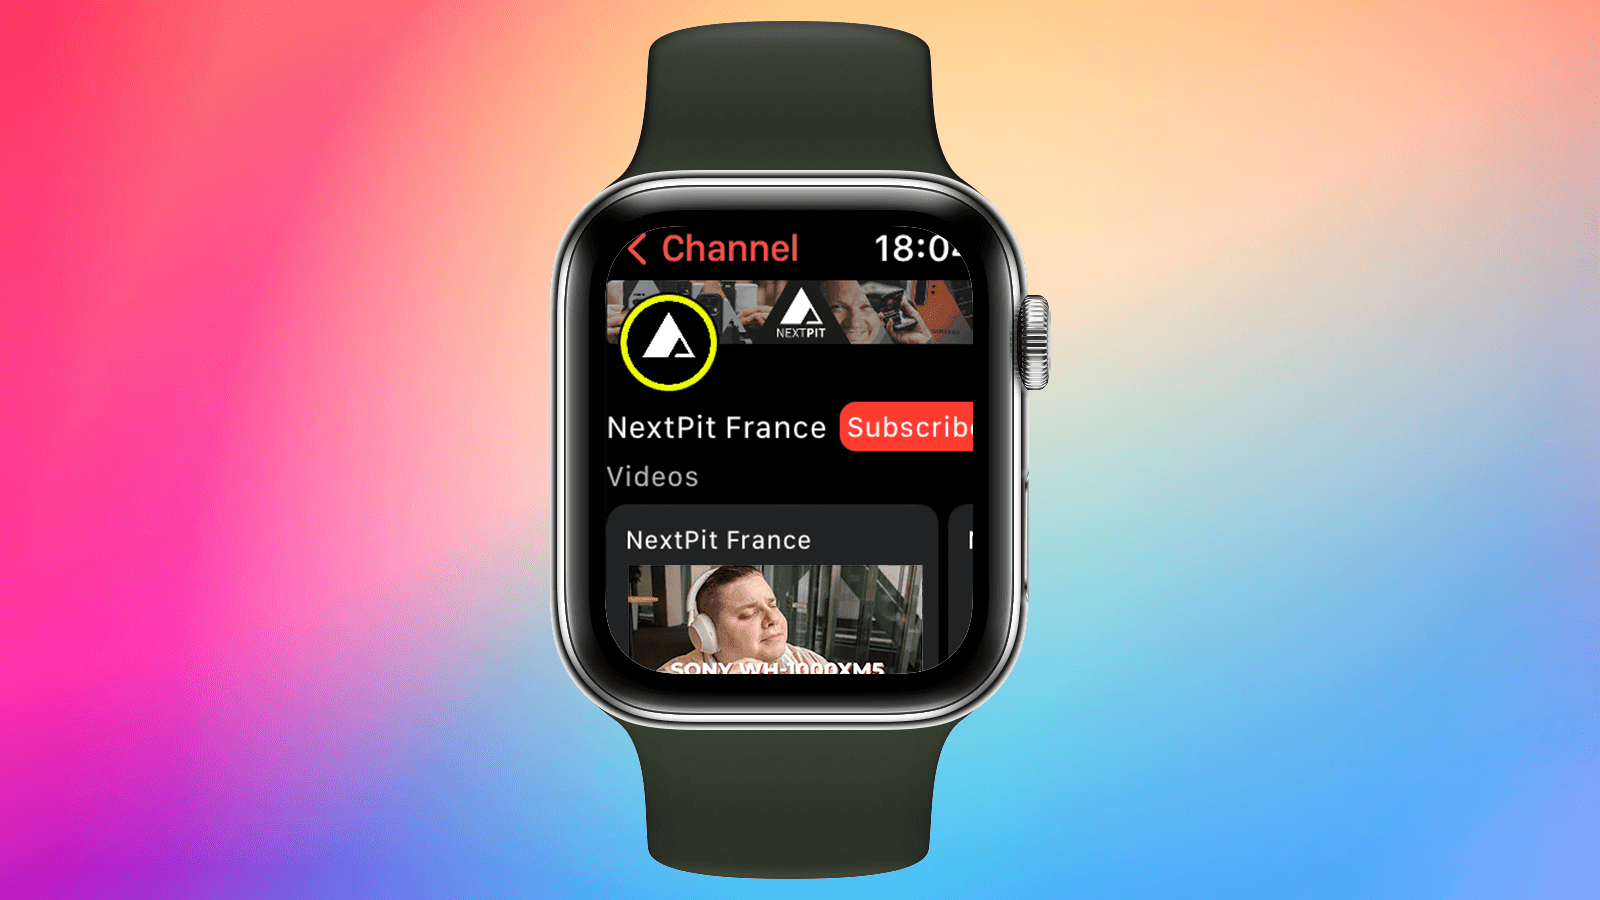 How To Watch Video On Apple Watch